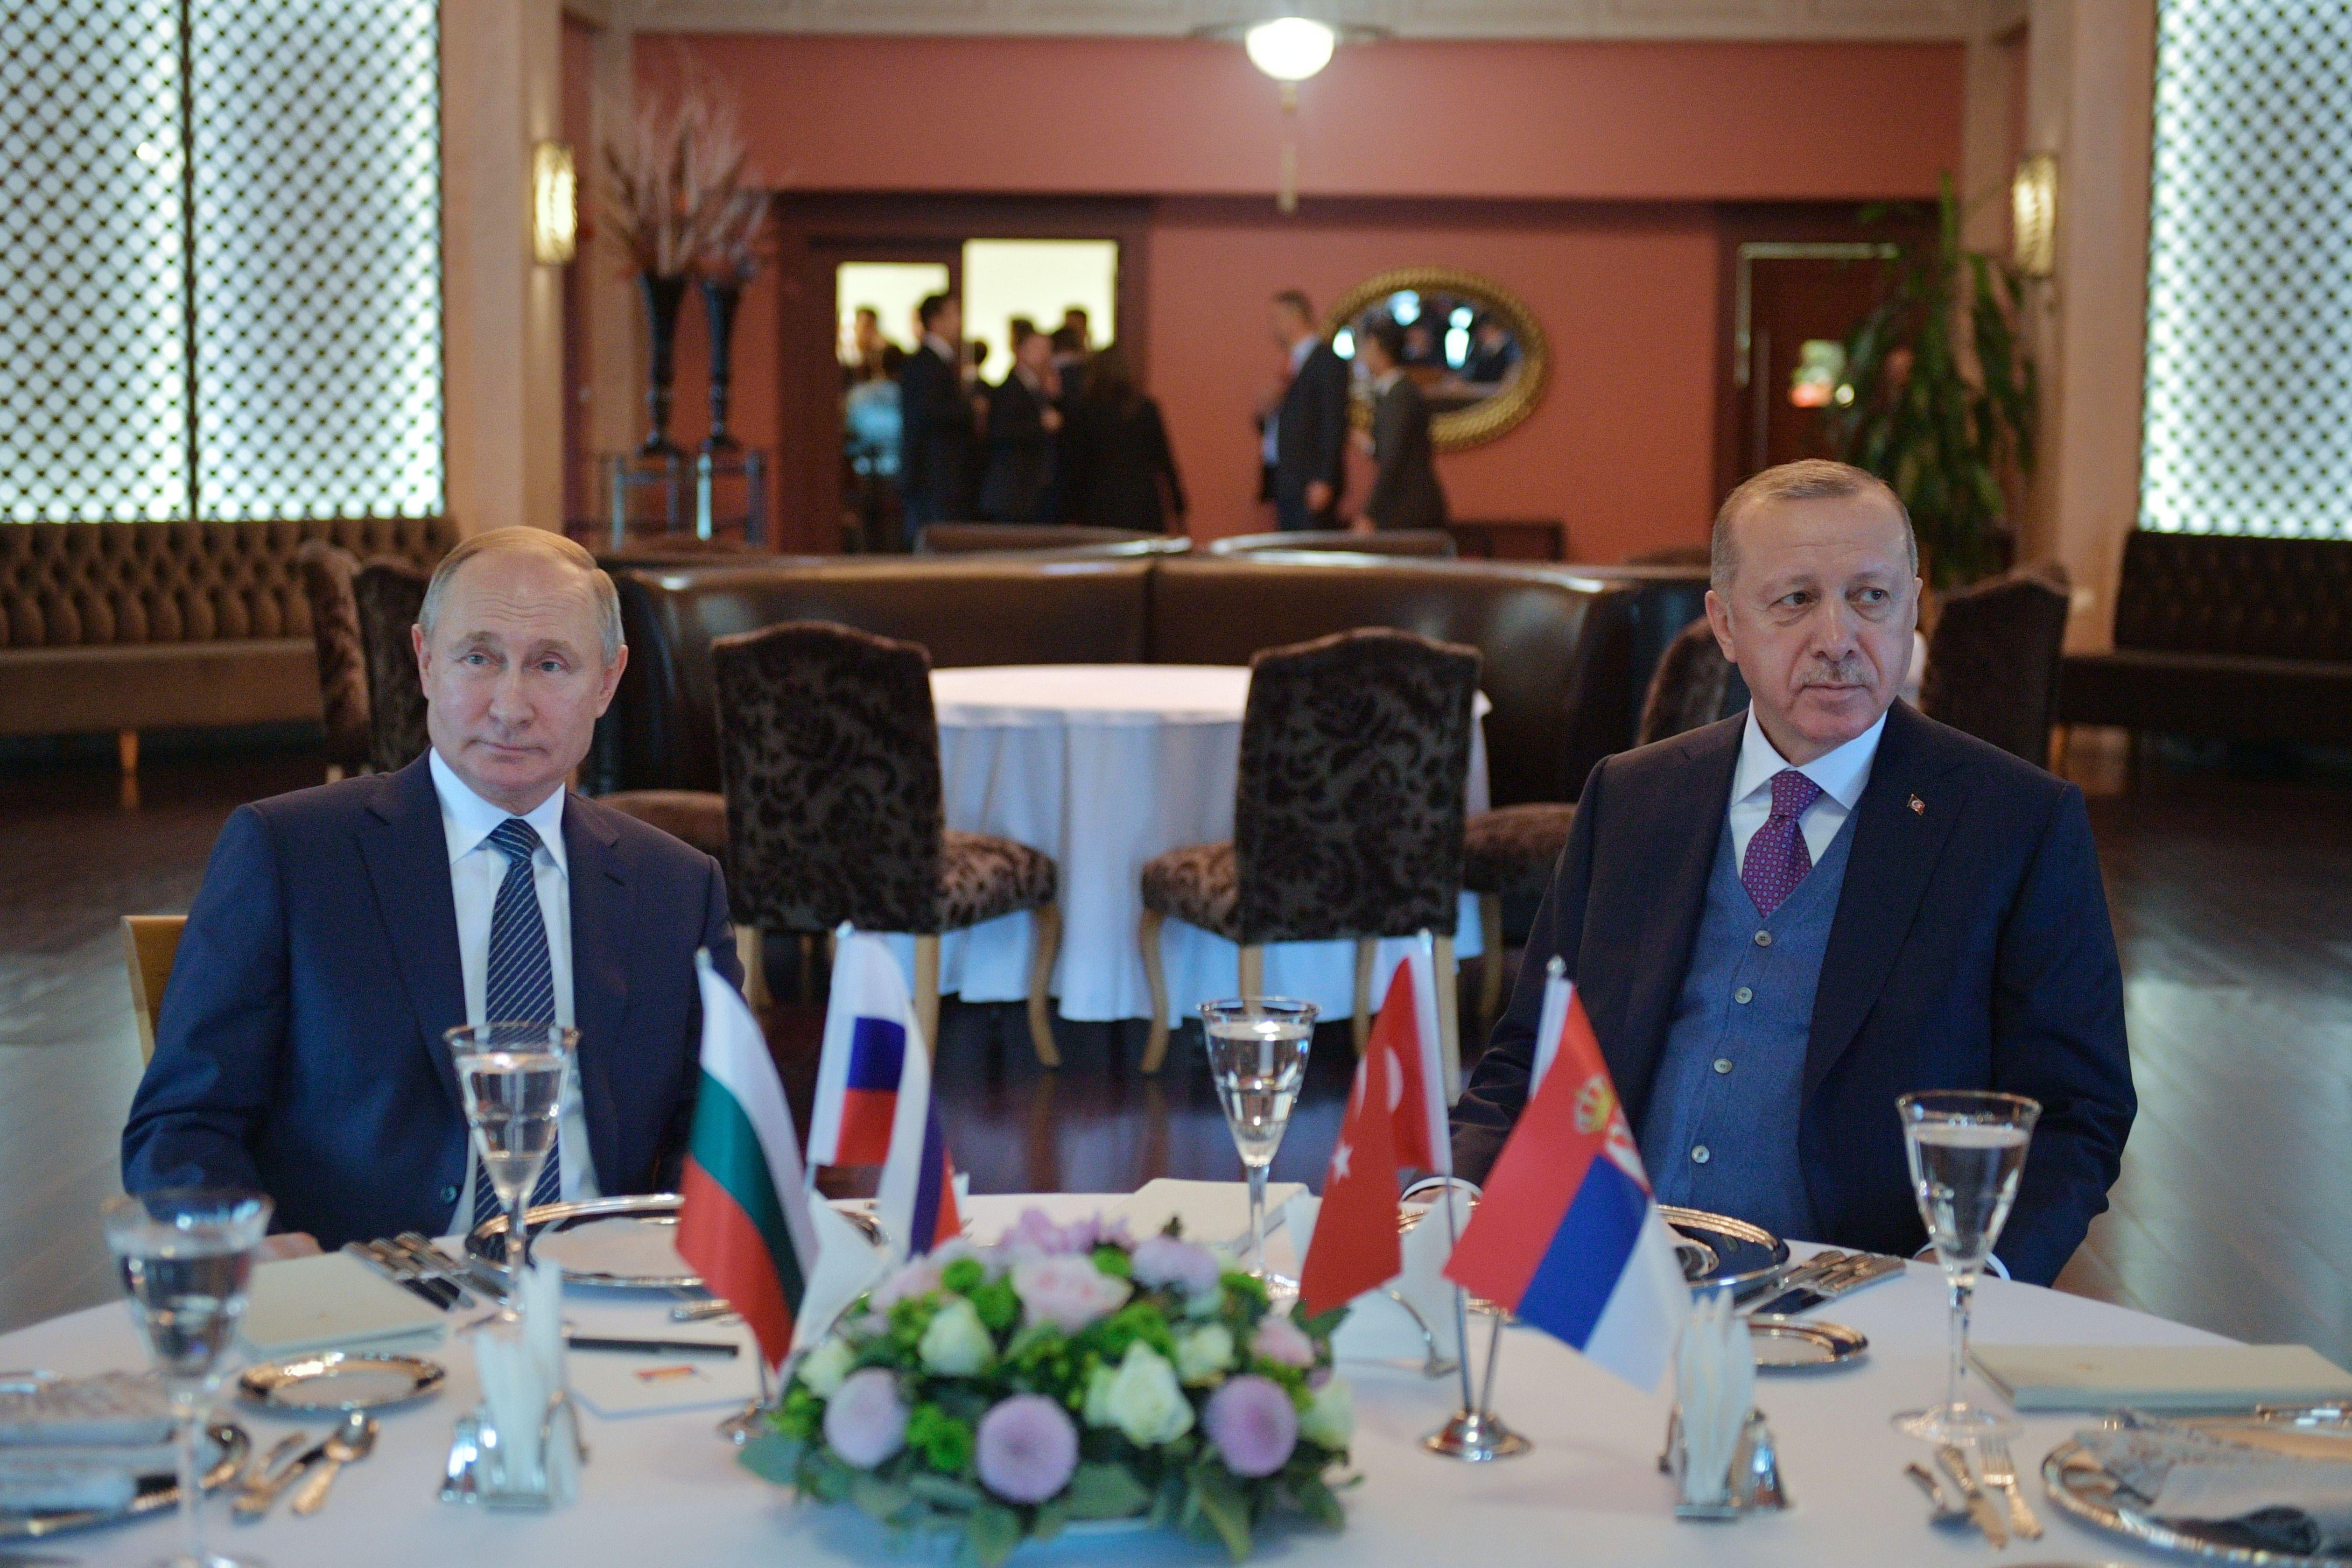 Russian President Vladimir Putin and Turkish President Recep Tayyip Erdogan sit at the same table looking away from one another during a meeting in Istanbul.